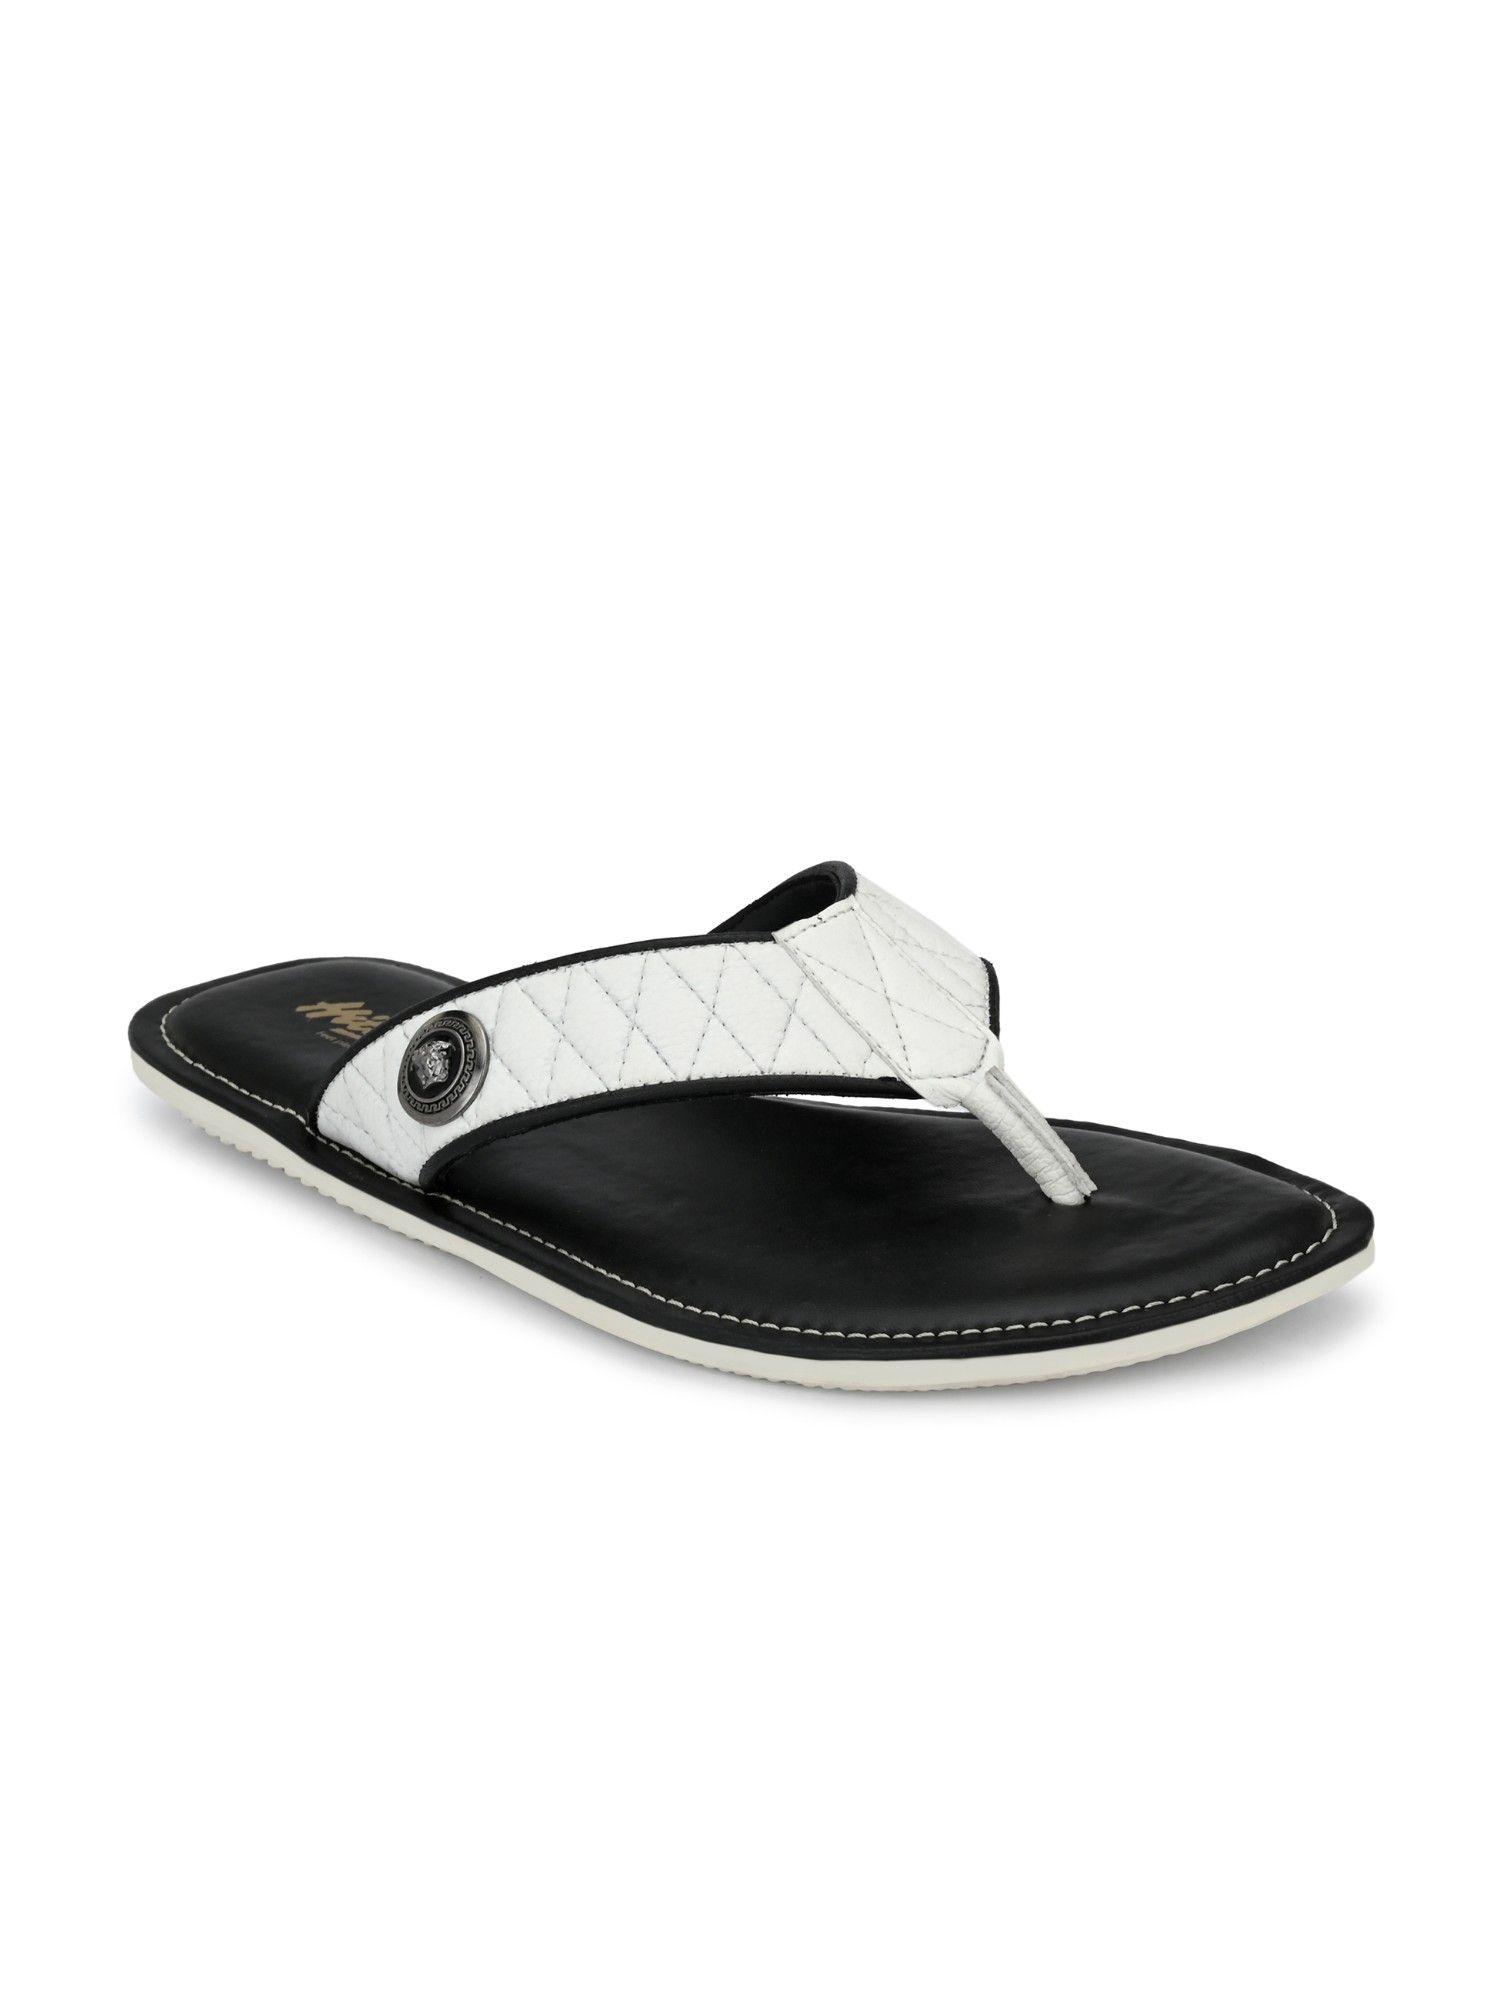 men's-white-leather-casual-open-toe-indoor-outdoor-slippers